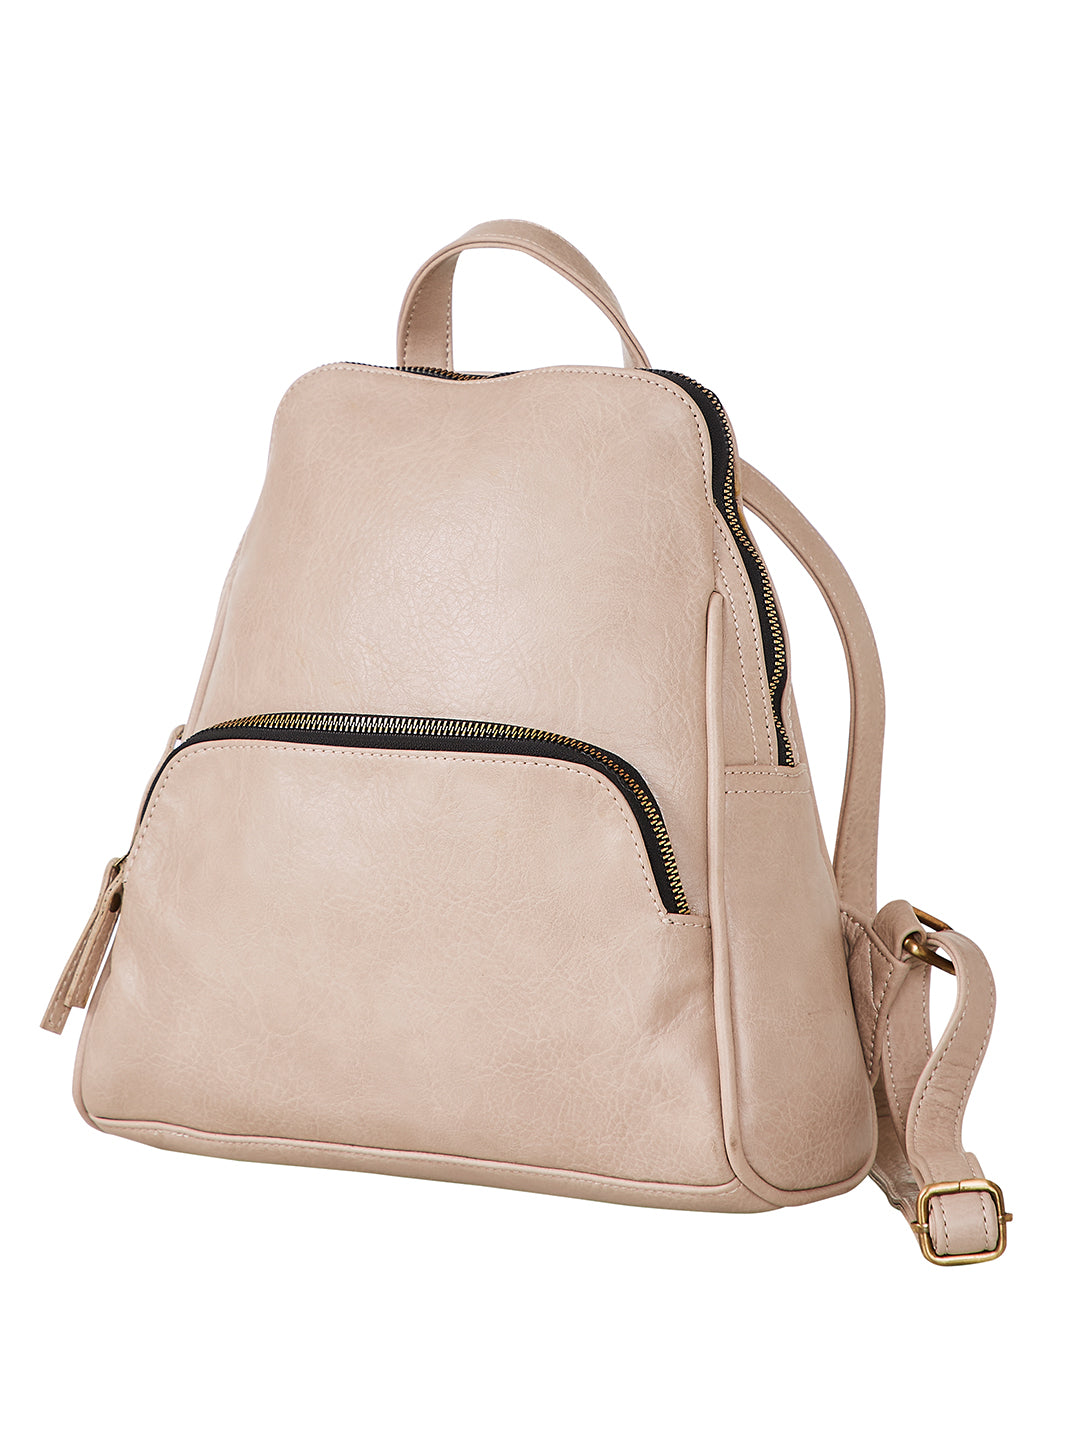 Mona B Convertible Daypack for Offices Schools and Colleges with Stylish Design for Women: Nude